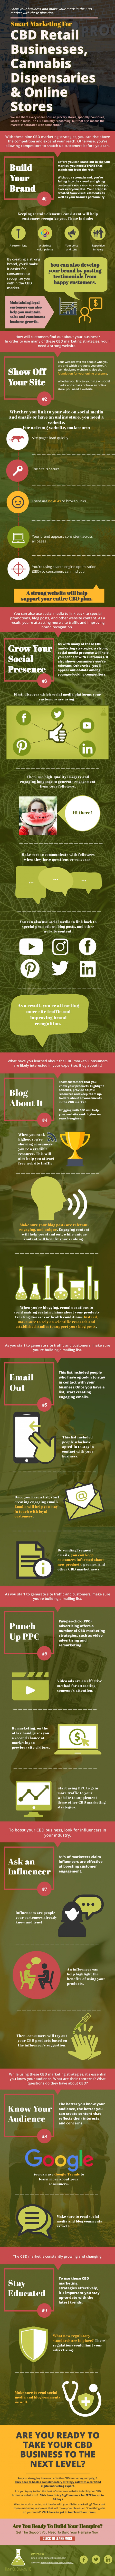 Smart Marketing For CBD Retail Businesses, Cannabis Dispensaries & Online Stores Infographic